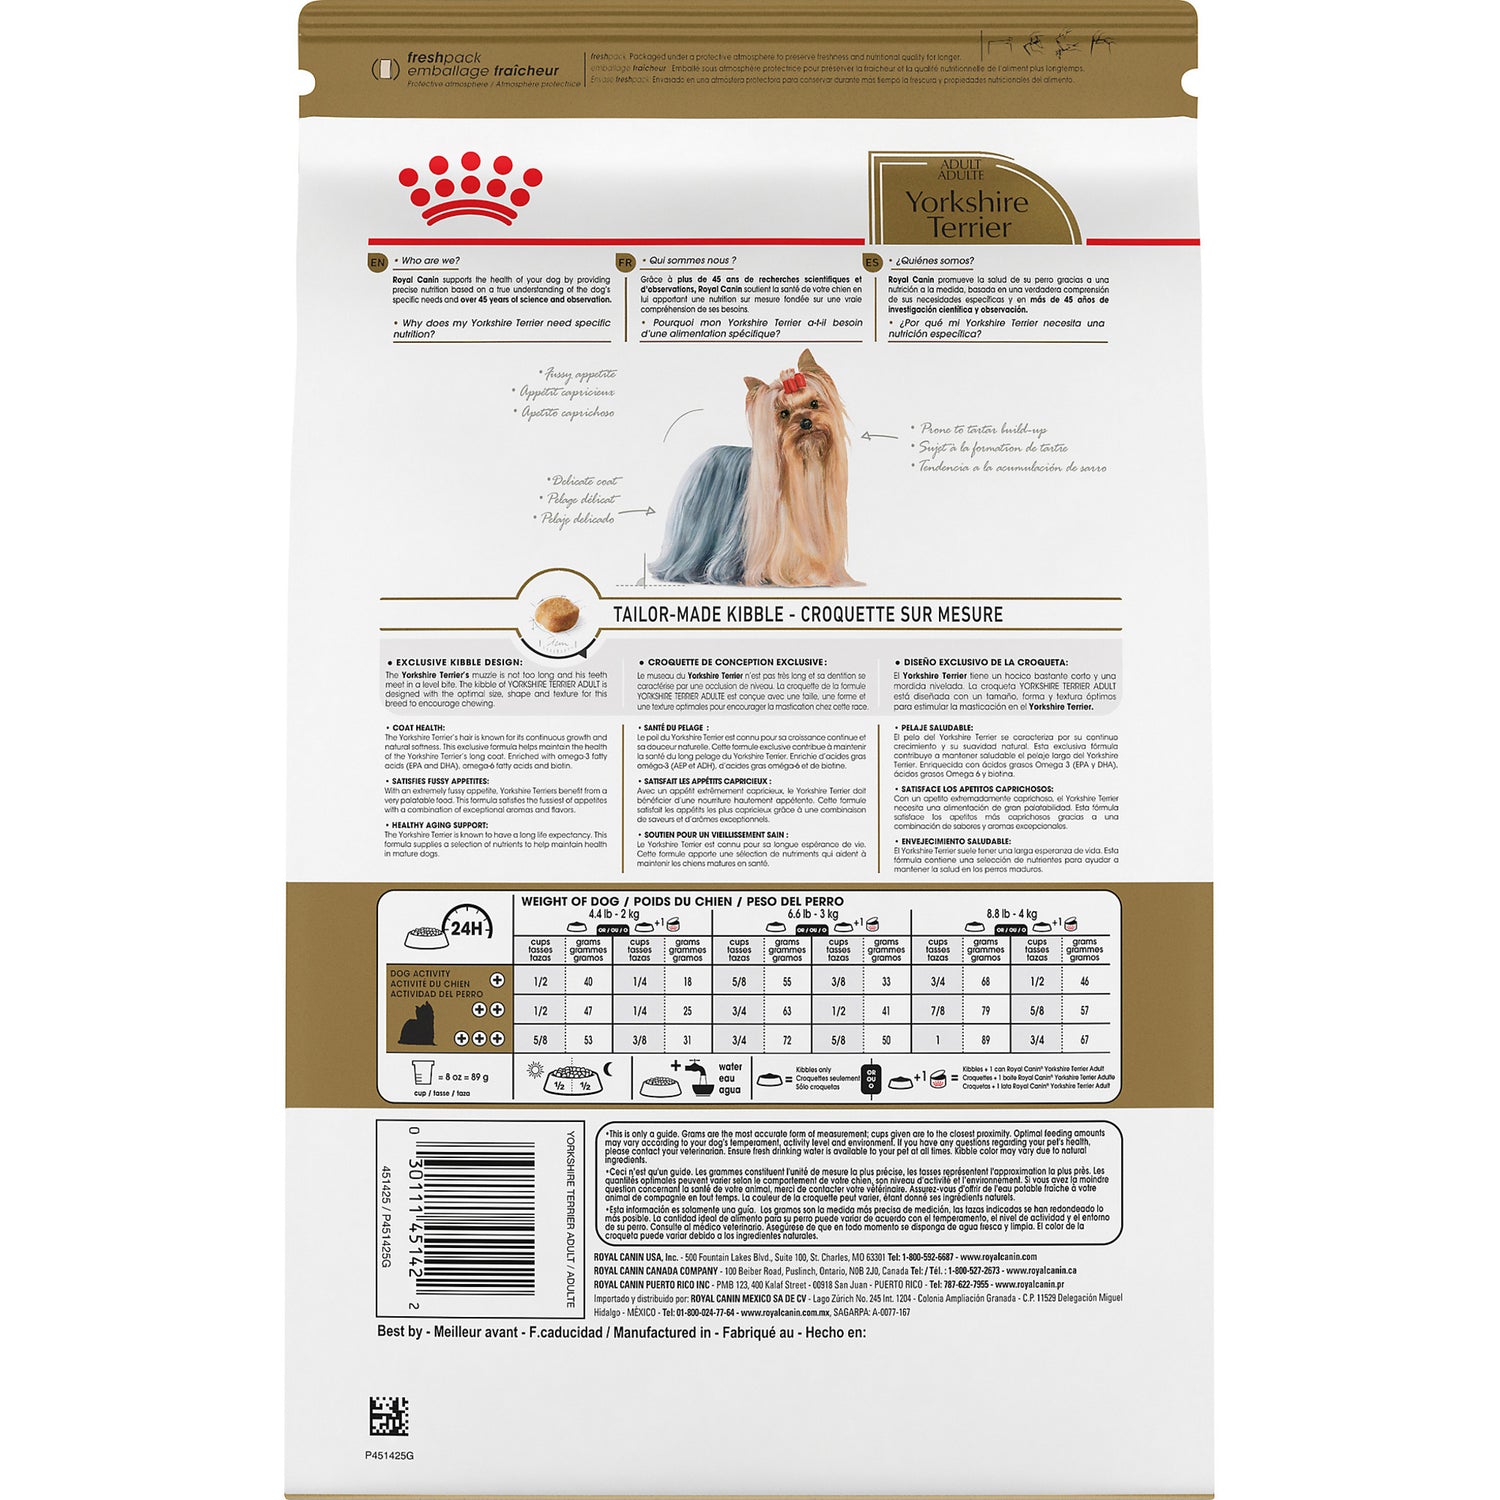 Royal Canin® Breed Health Nutrition® Yorkshire Terrier Adult Dry Dog Food